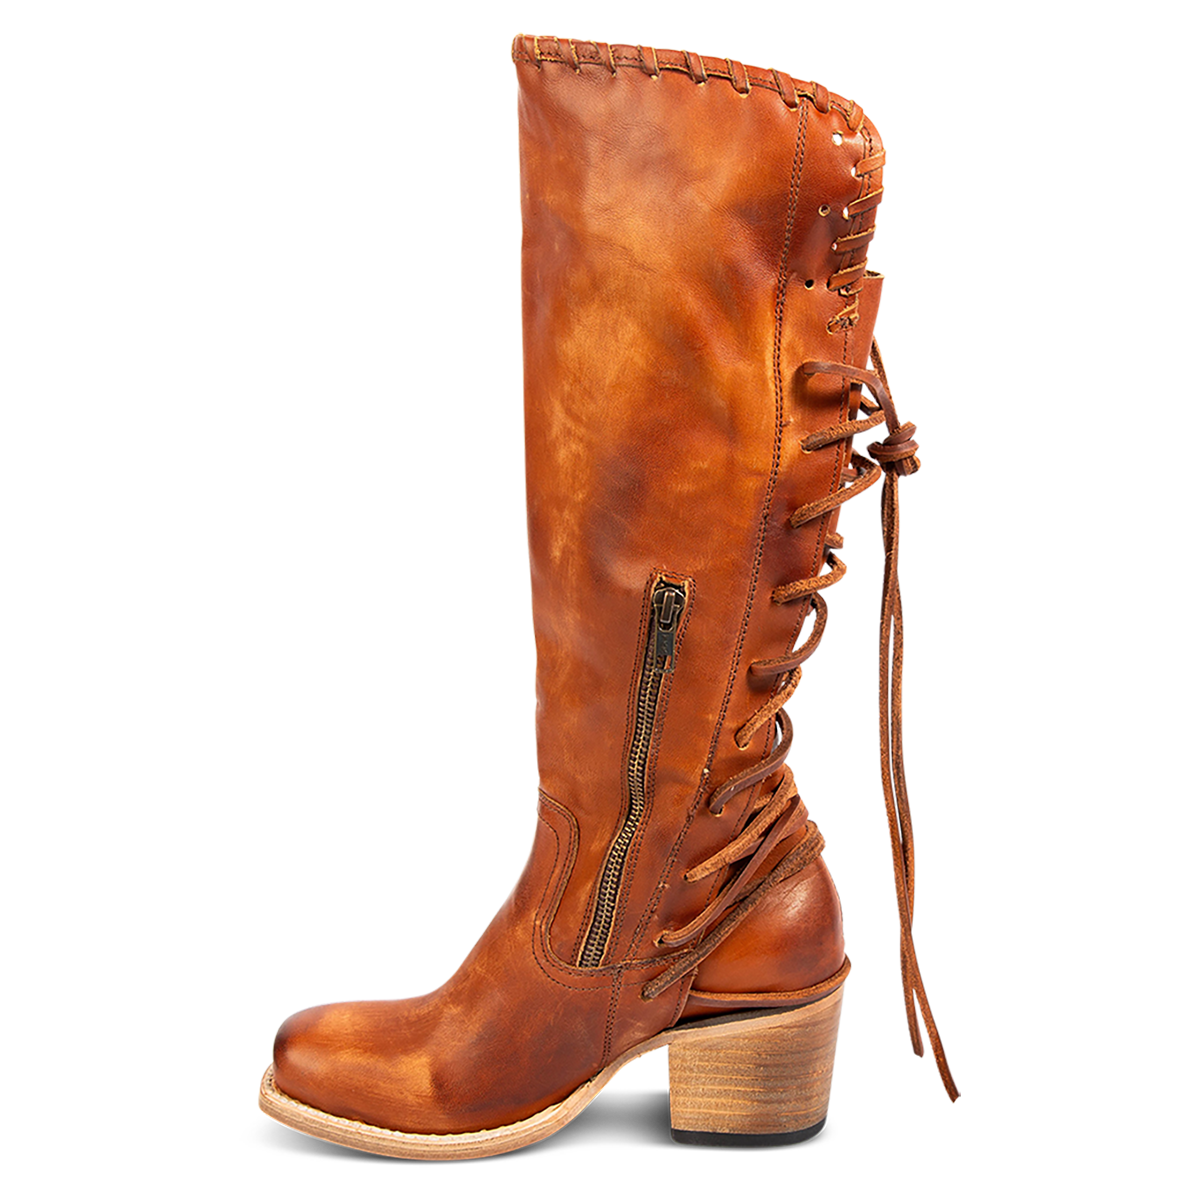 Inside view showing an inside working brass zipper on FREEBIRD women's Dillon whiskey leather boot with 100% full grain leather, whip stitch edge detailing and adjustable back leather lacing